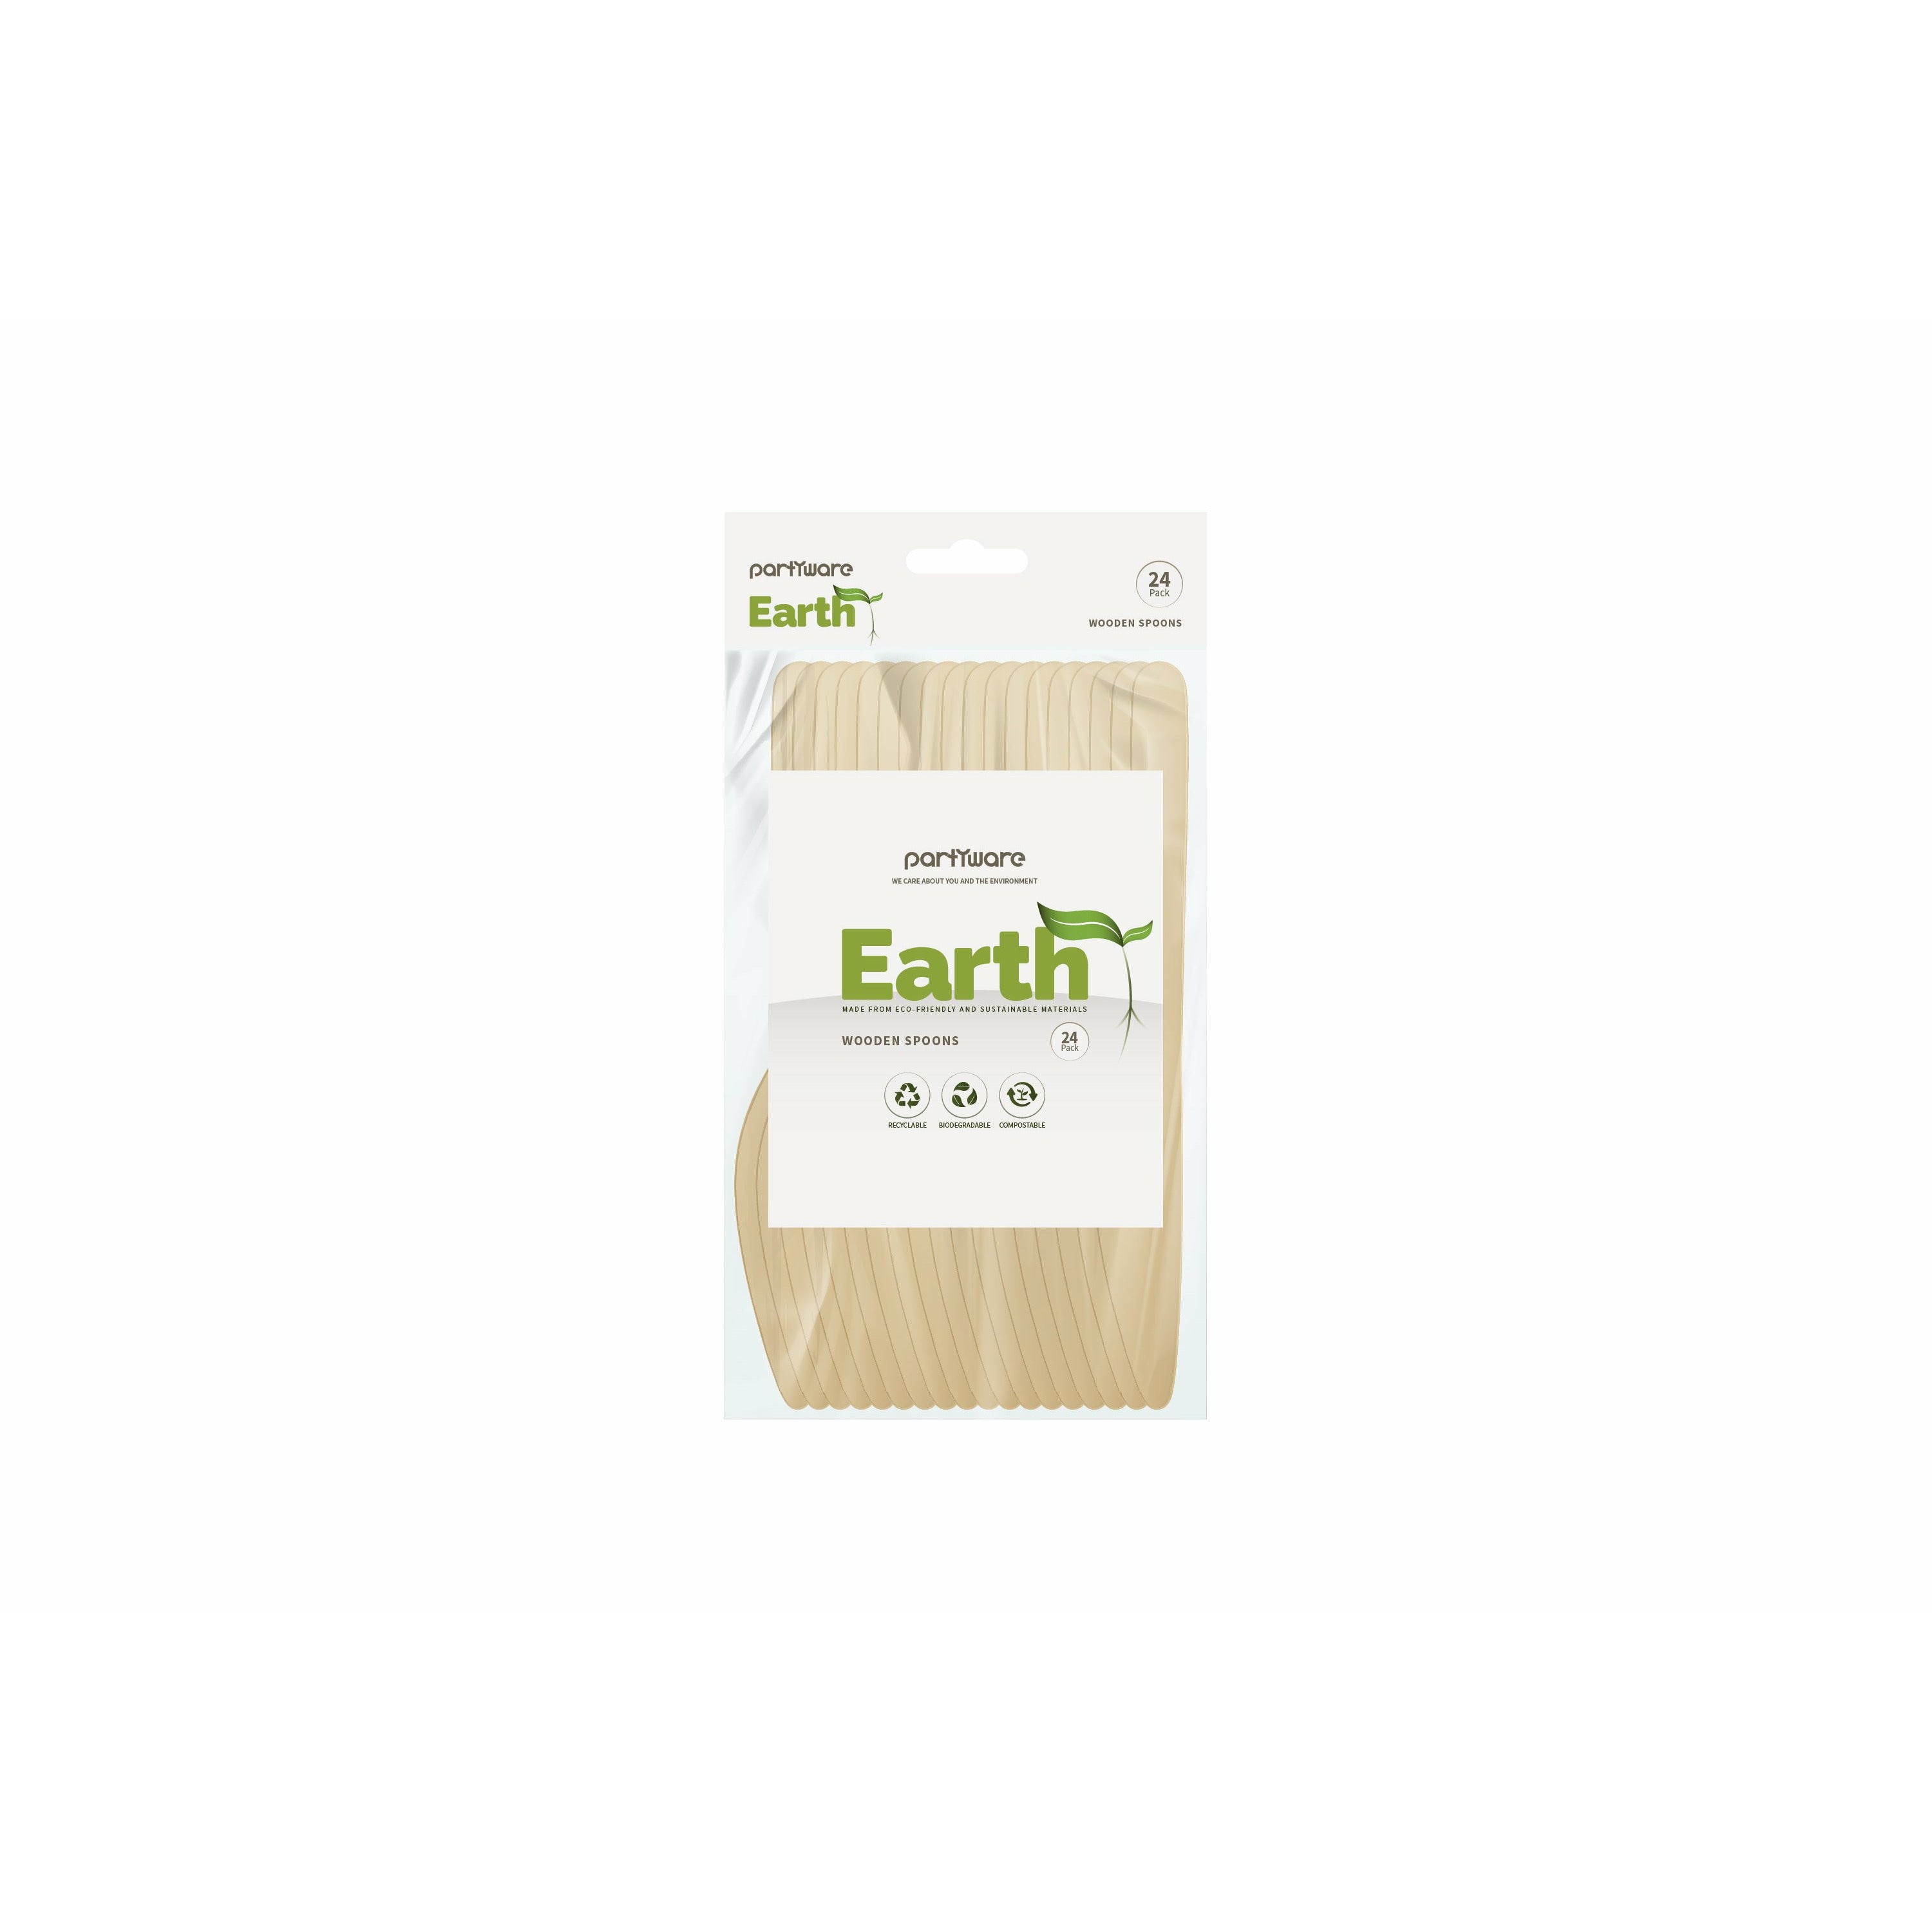 Partyware Earth Wooden Knife - 24 Pack 16.5cm Default Title